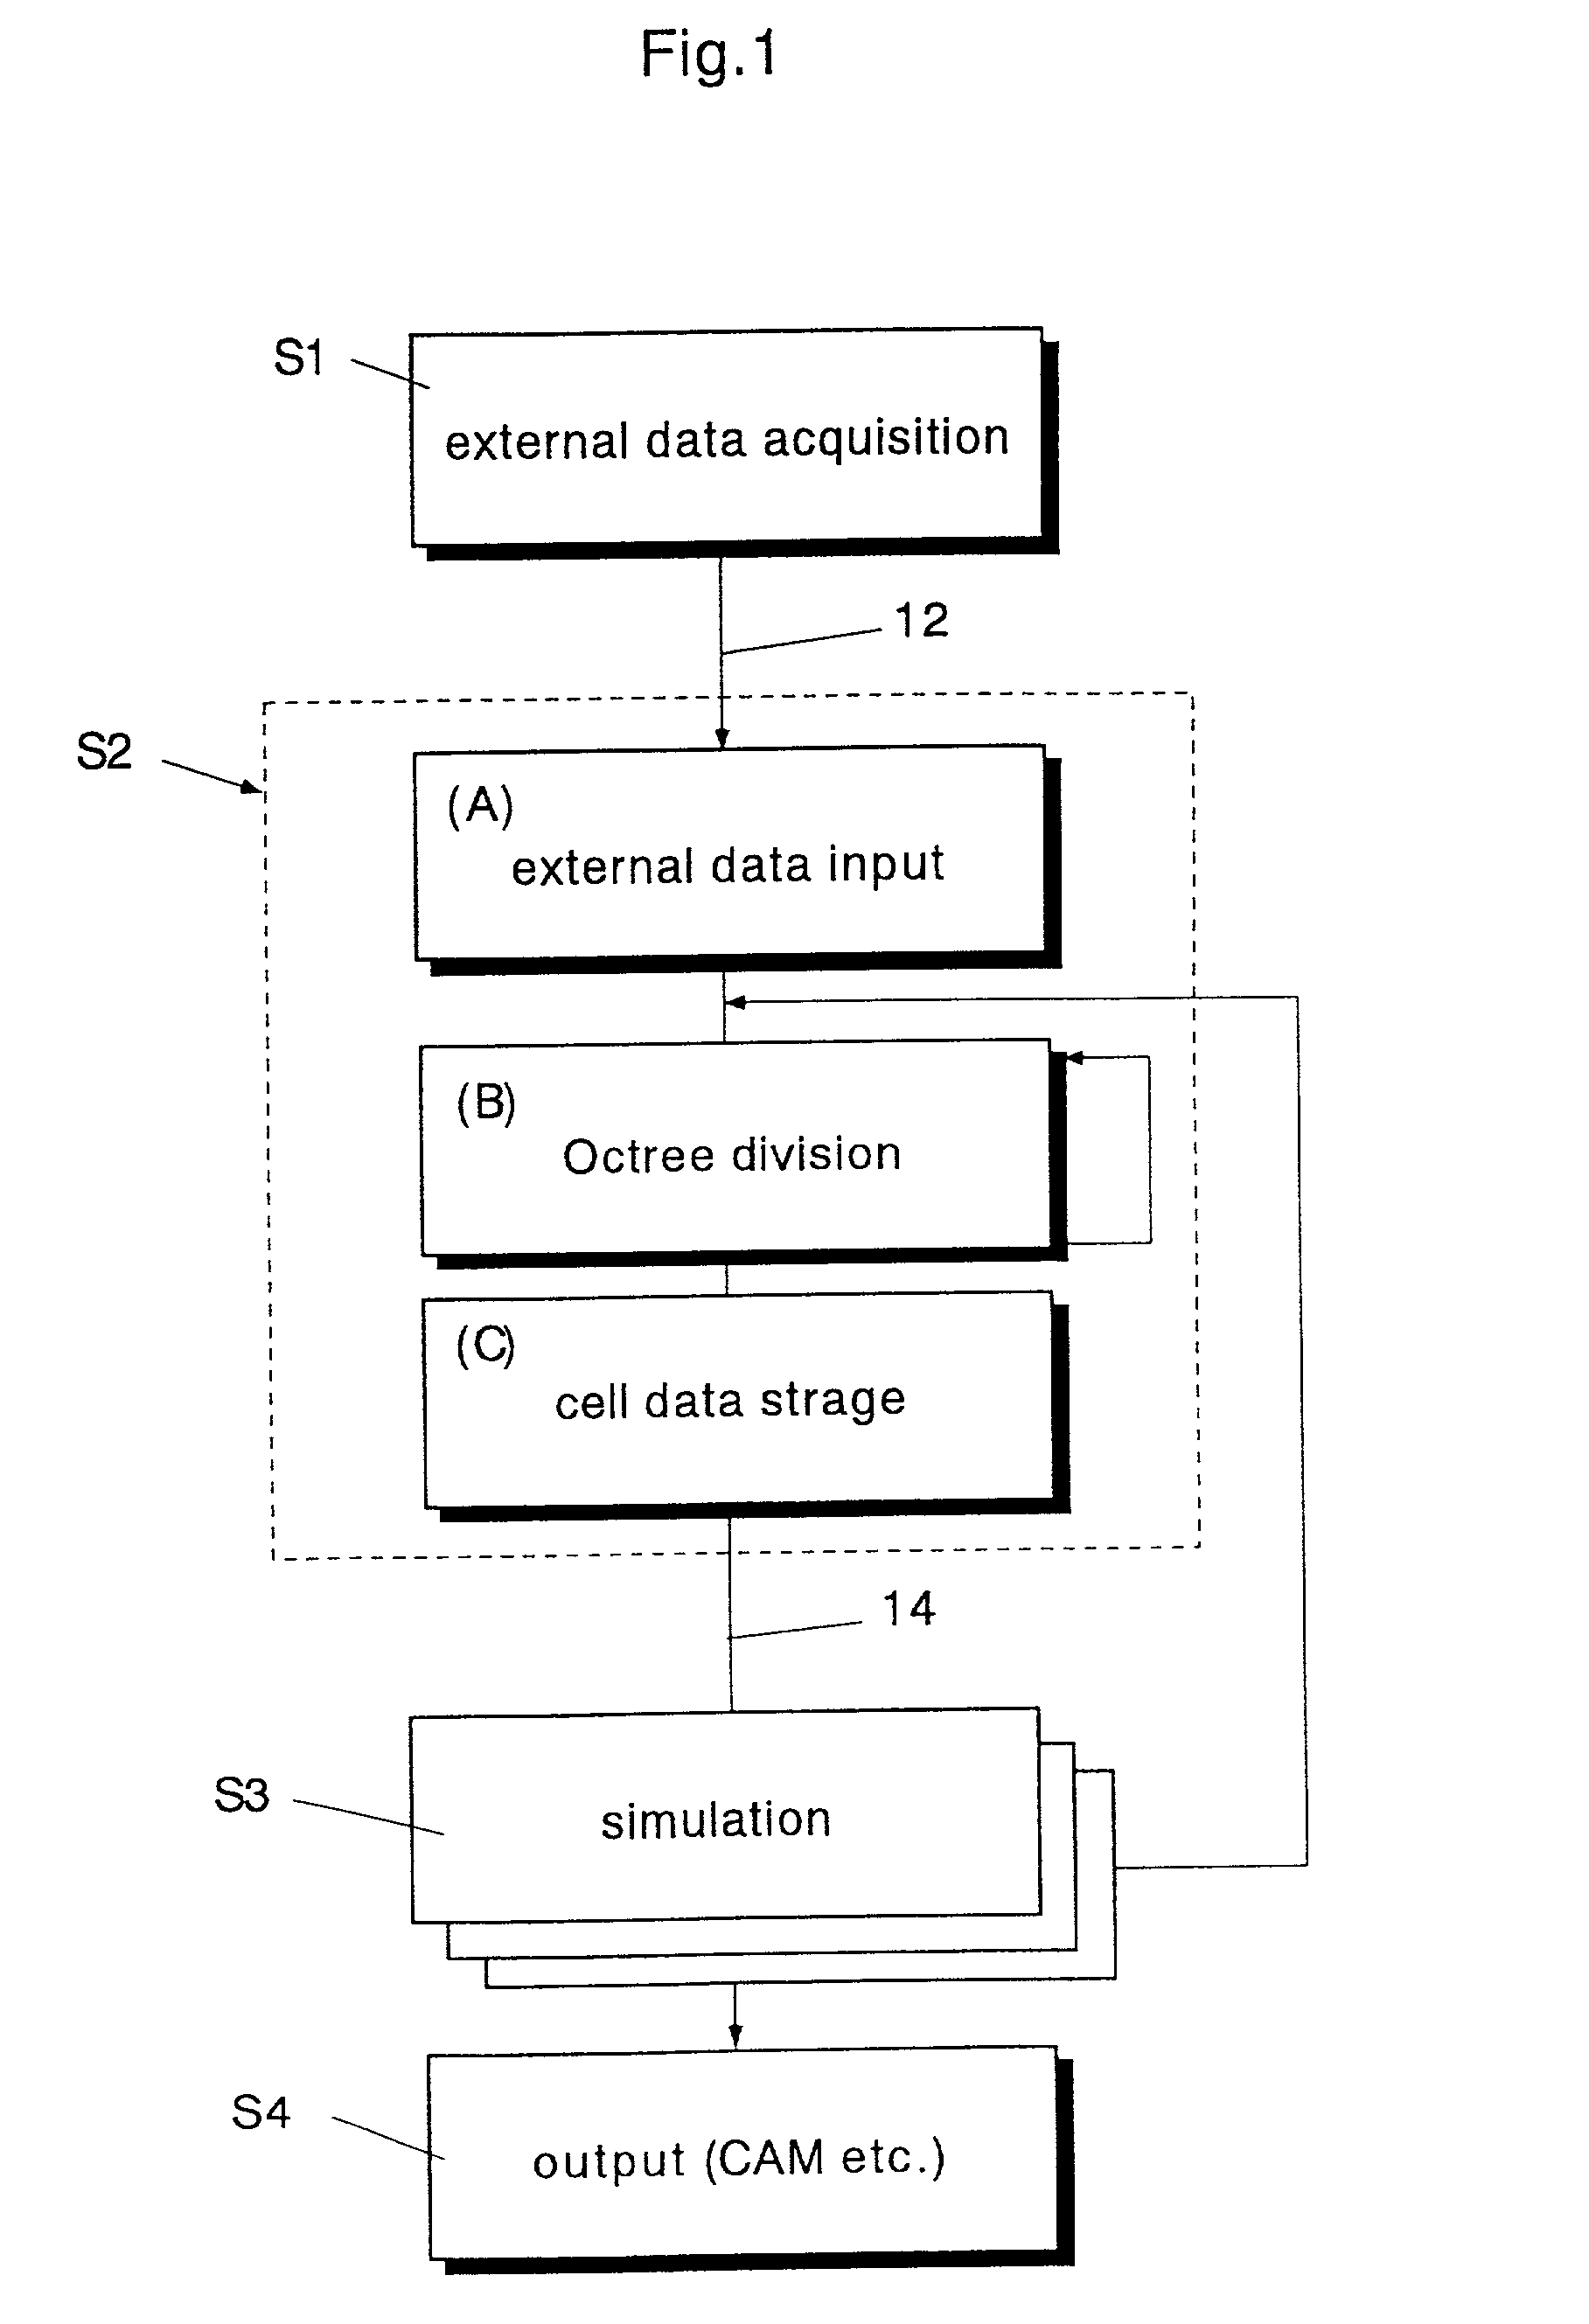 Storage method of substantial data integrating shape and physical properties